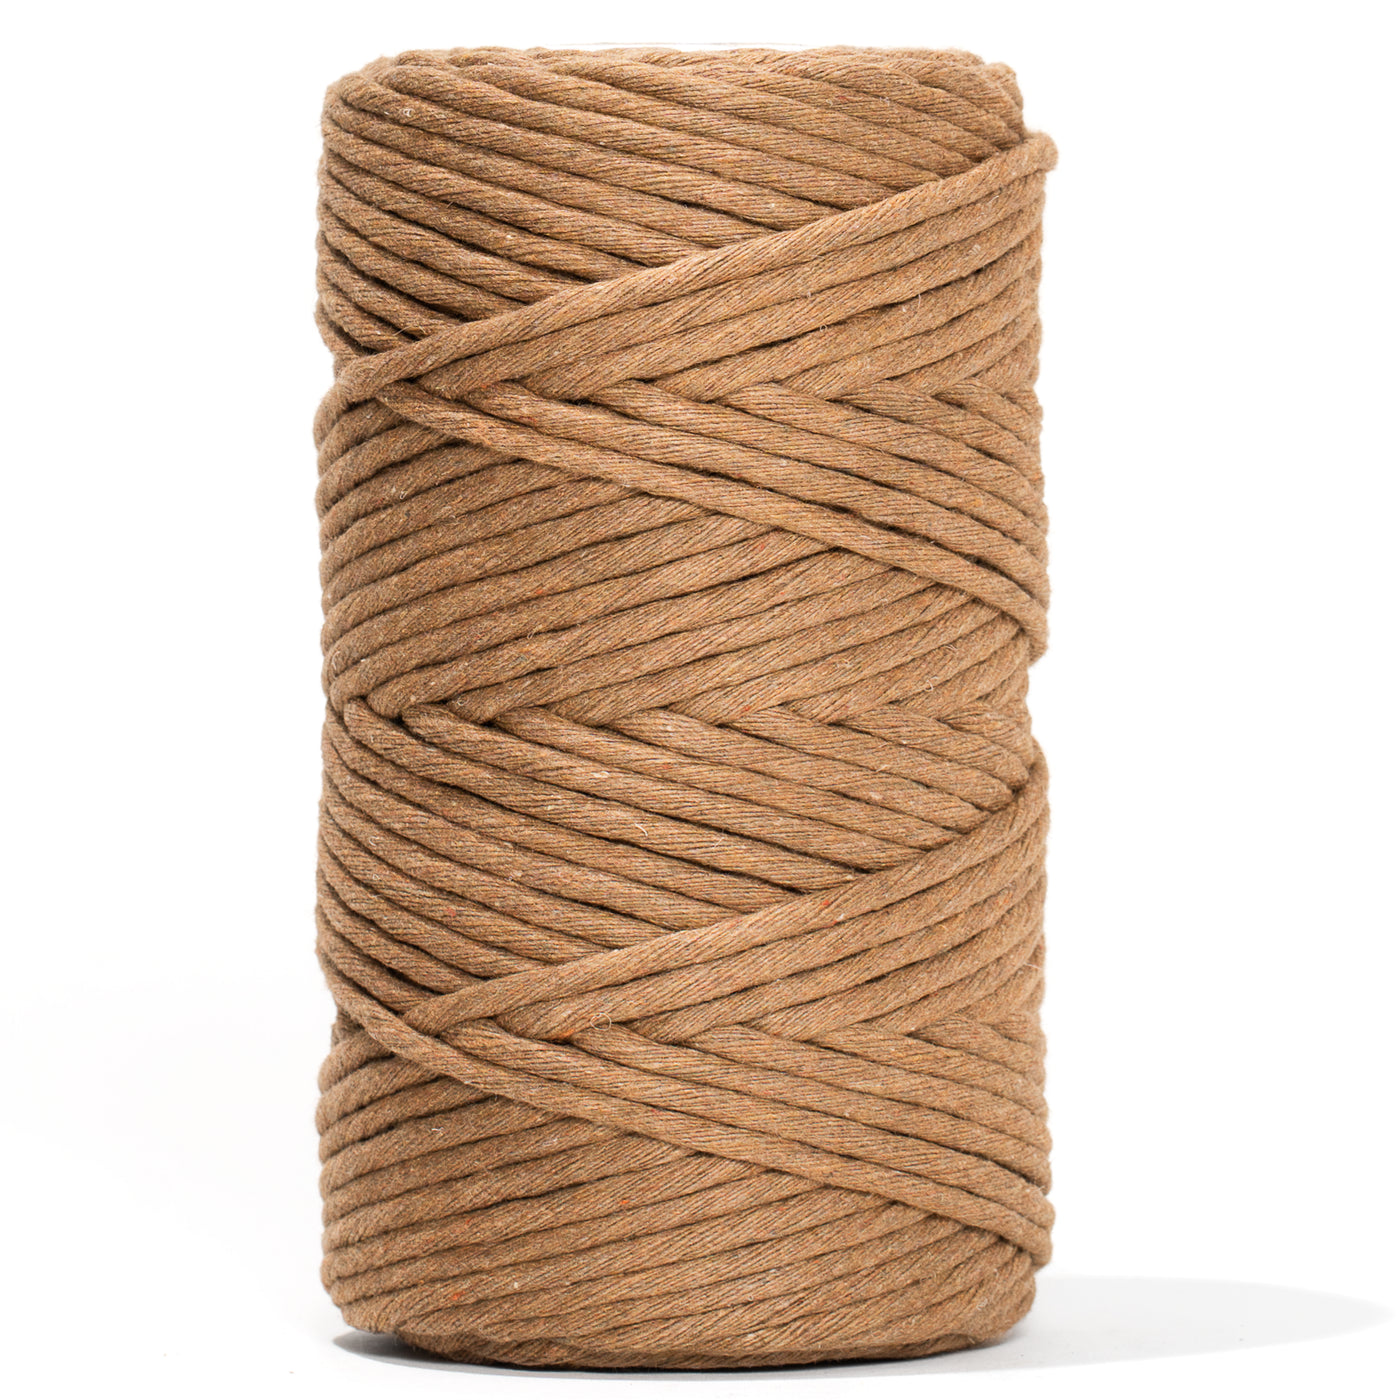 MACRAME SOFT COTTON CORD RECYCLED 4 MM - 1 SINGLE STRAND - CAMEL COLOR  GANXXET